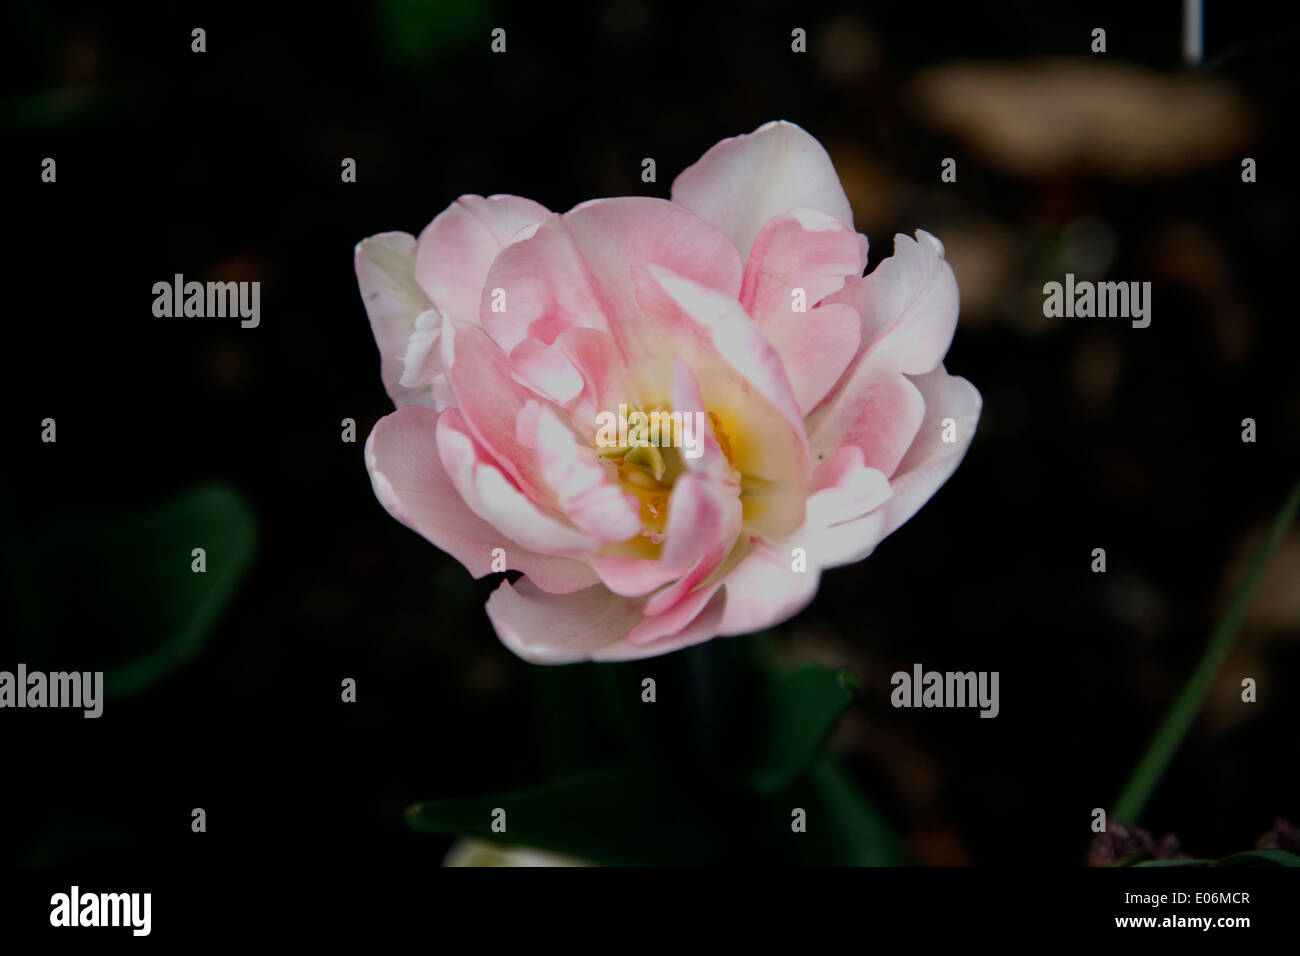 This acclaimed fully double bloom is varying shades of charming old rose with shimmering white highlights. Stock Photo